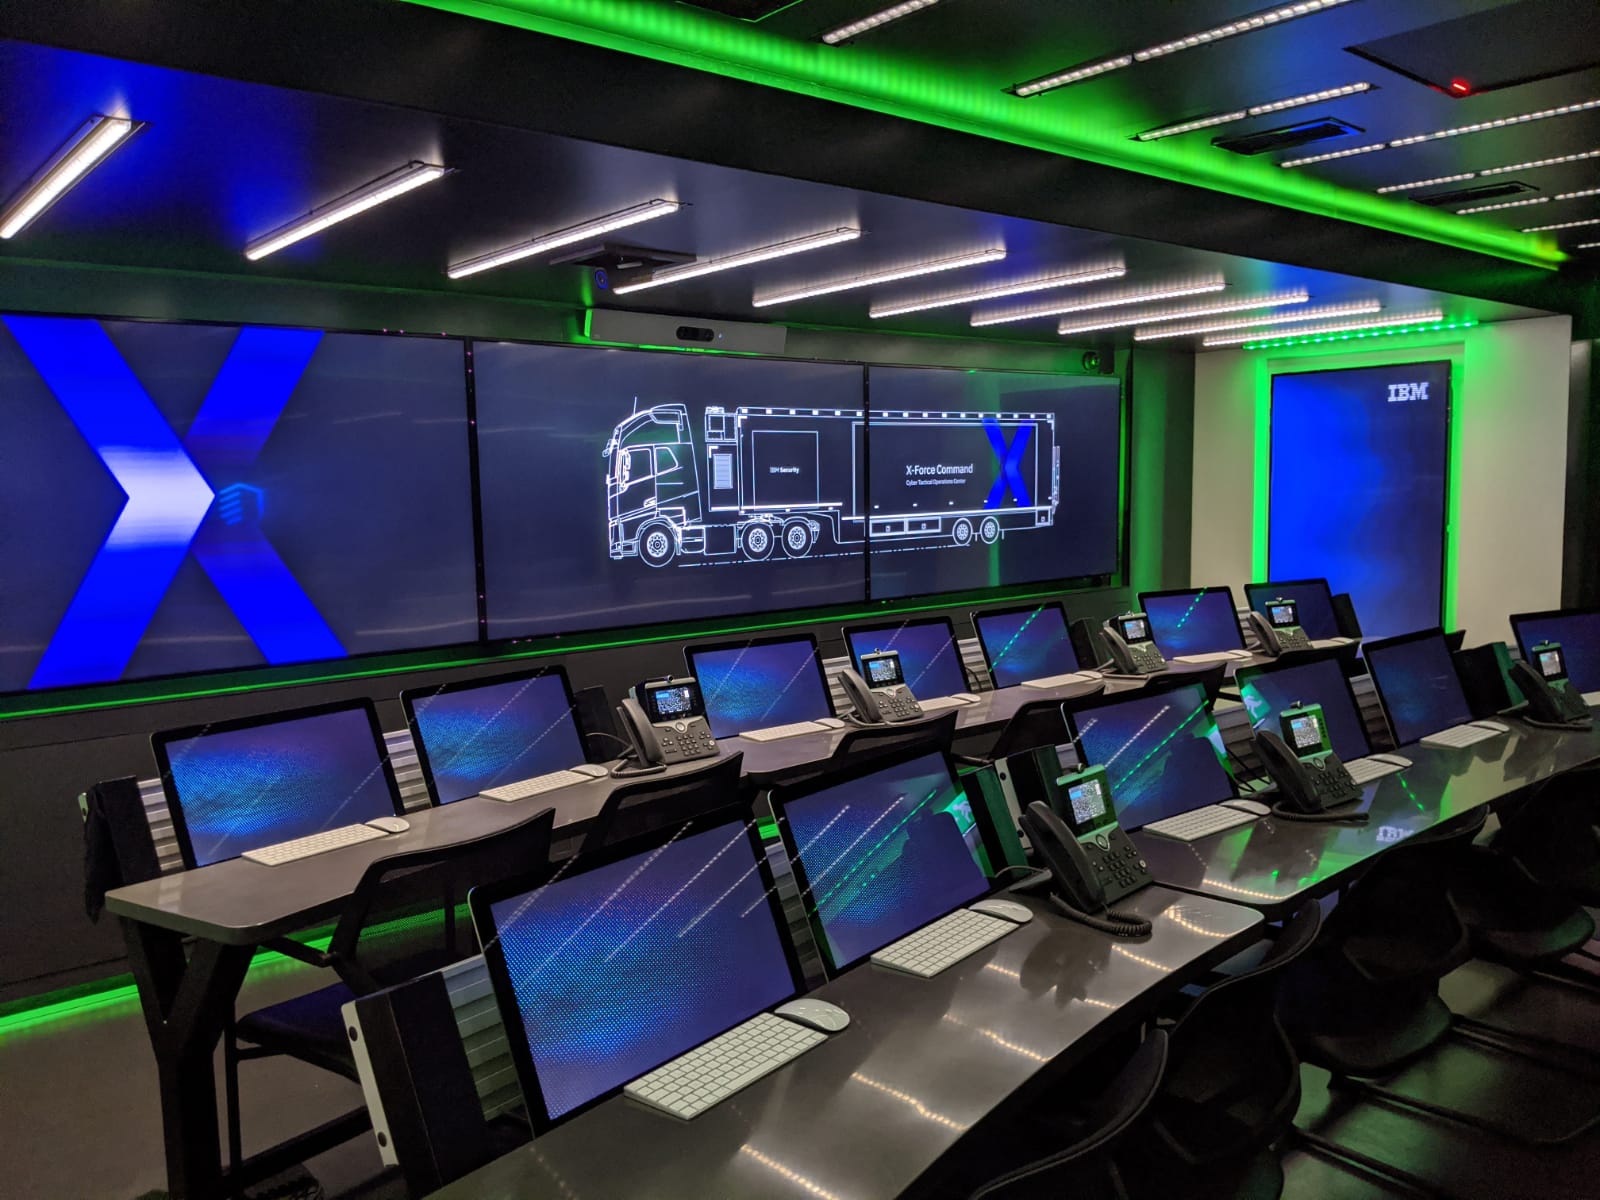 IBM command center with laptops and big screens